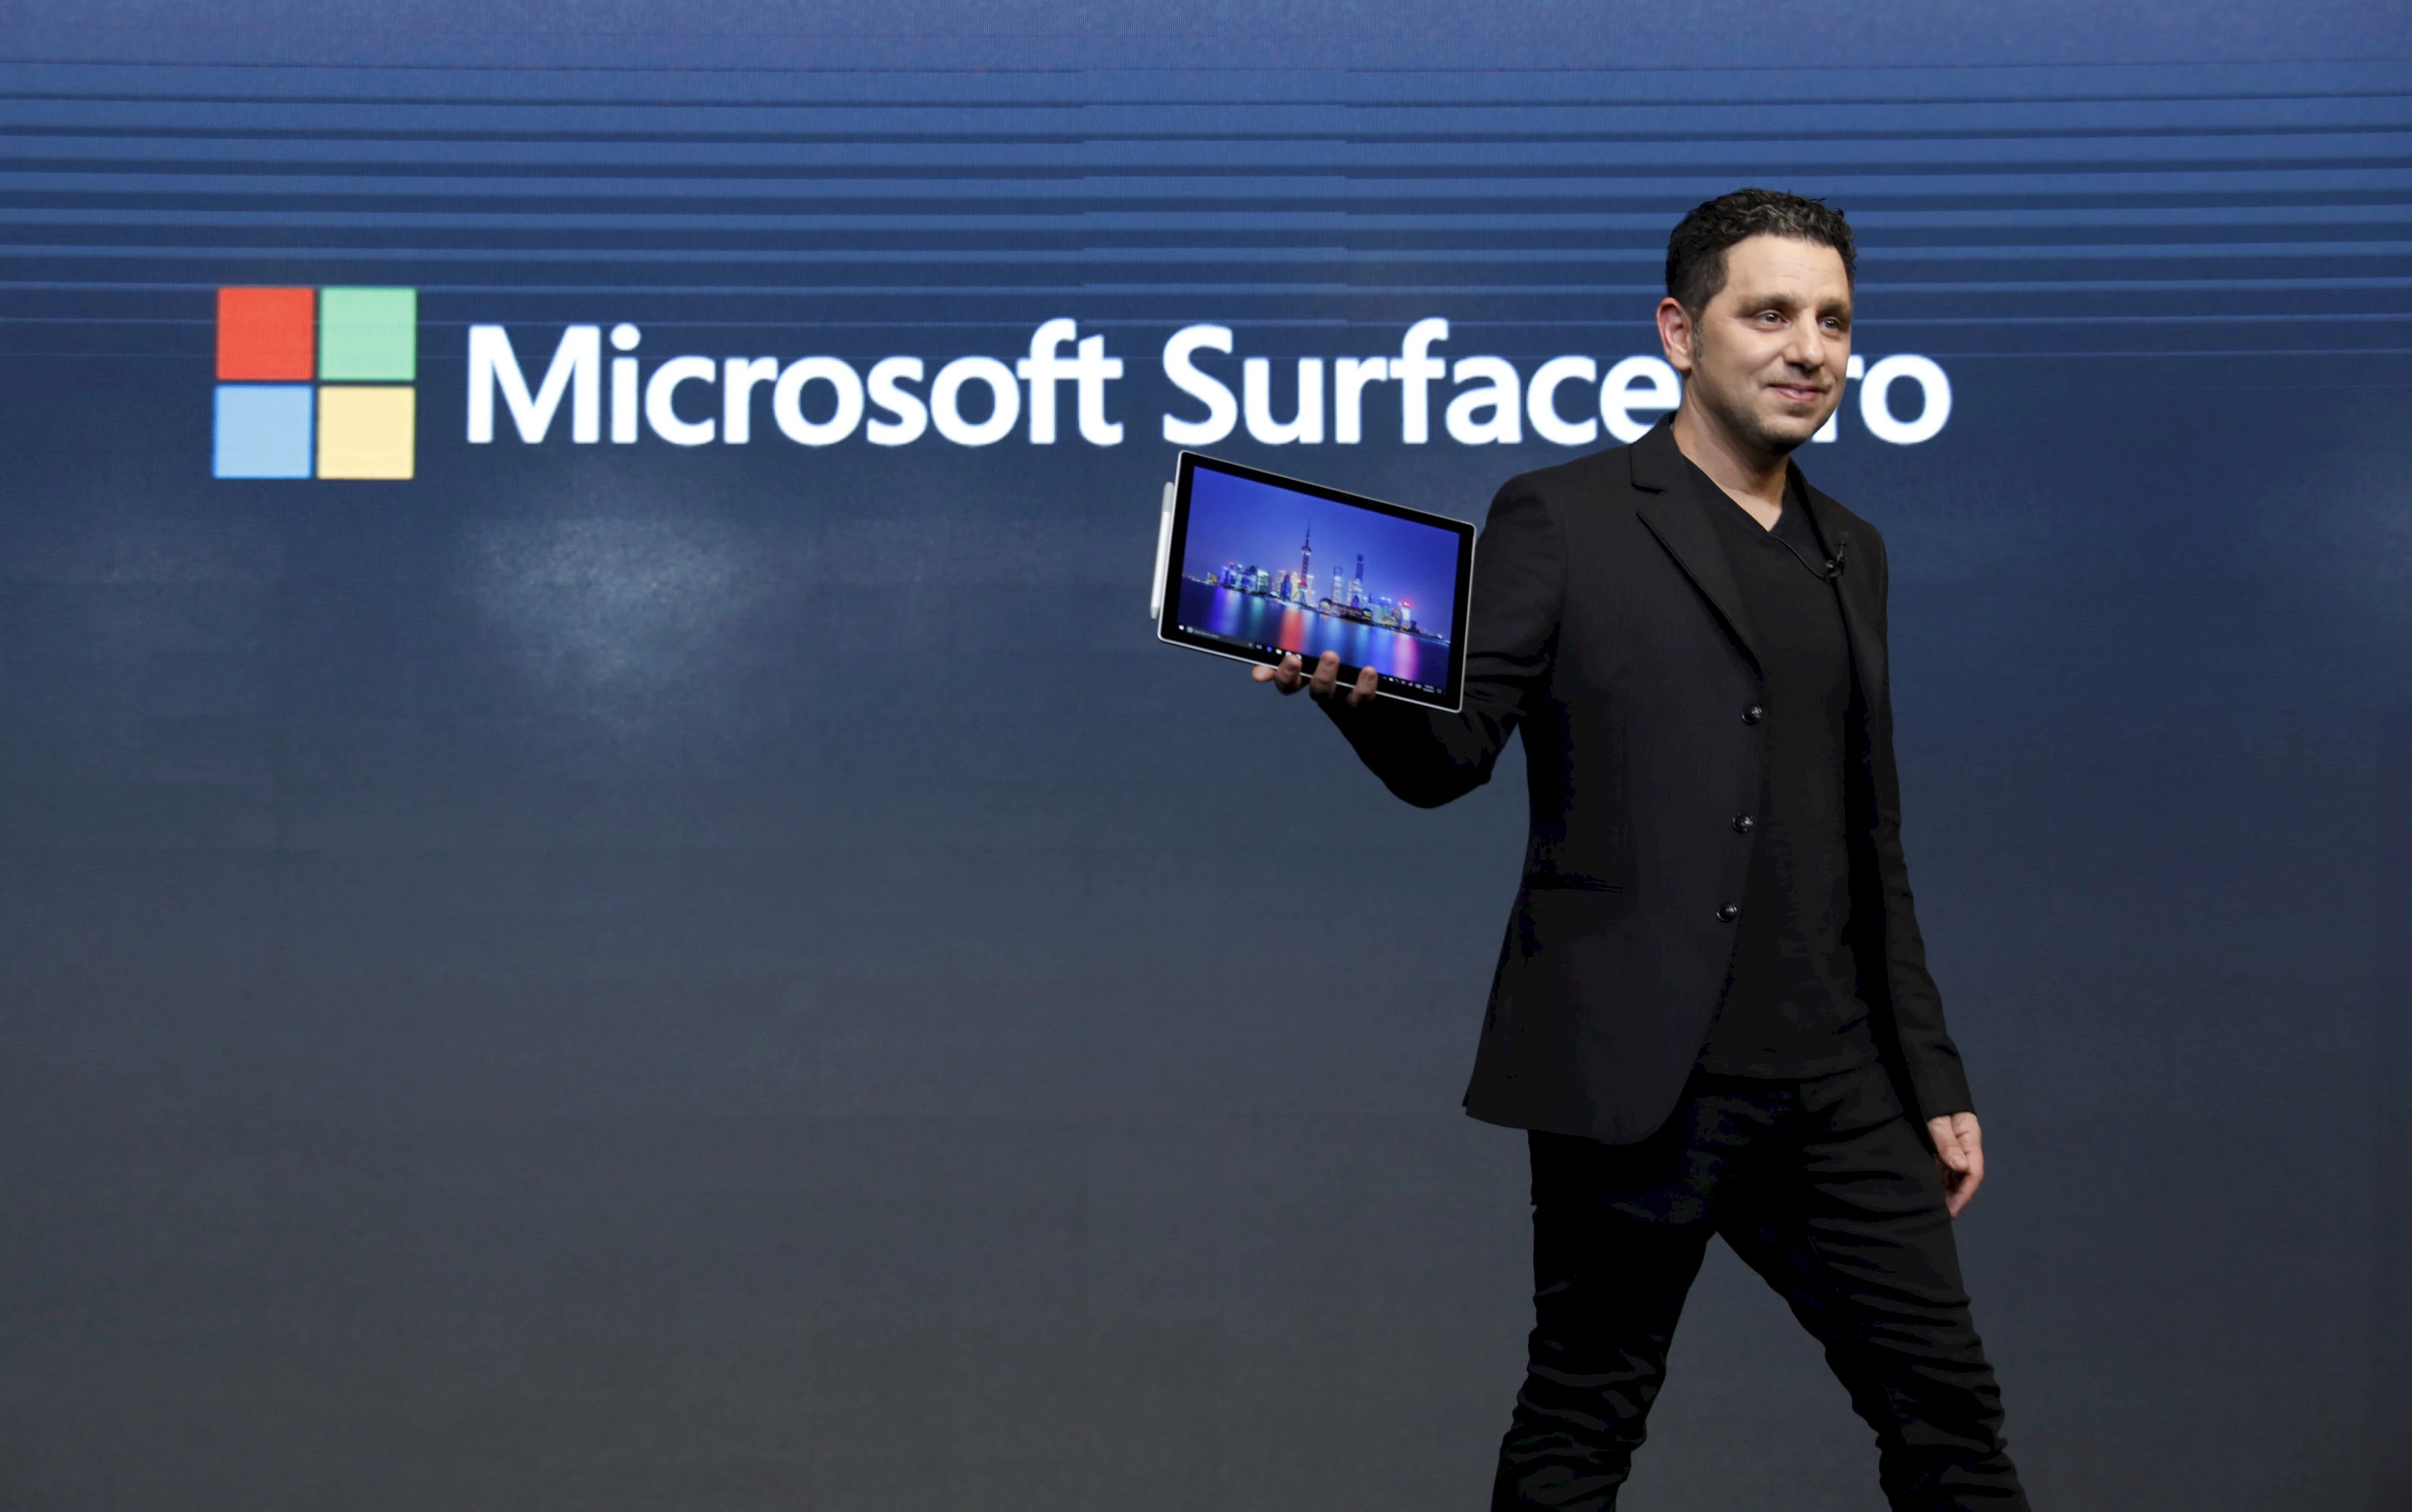 Panos Panay unveils the Surface Pro in Shanghai in 2017.